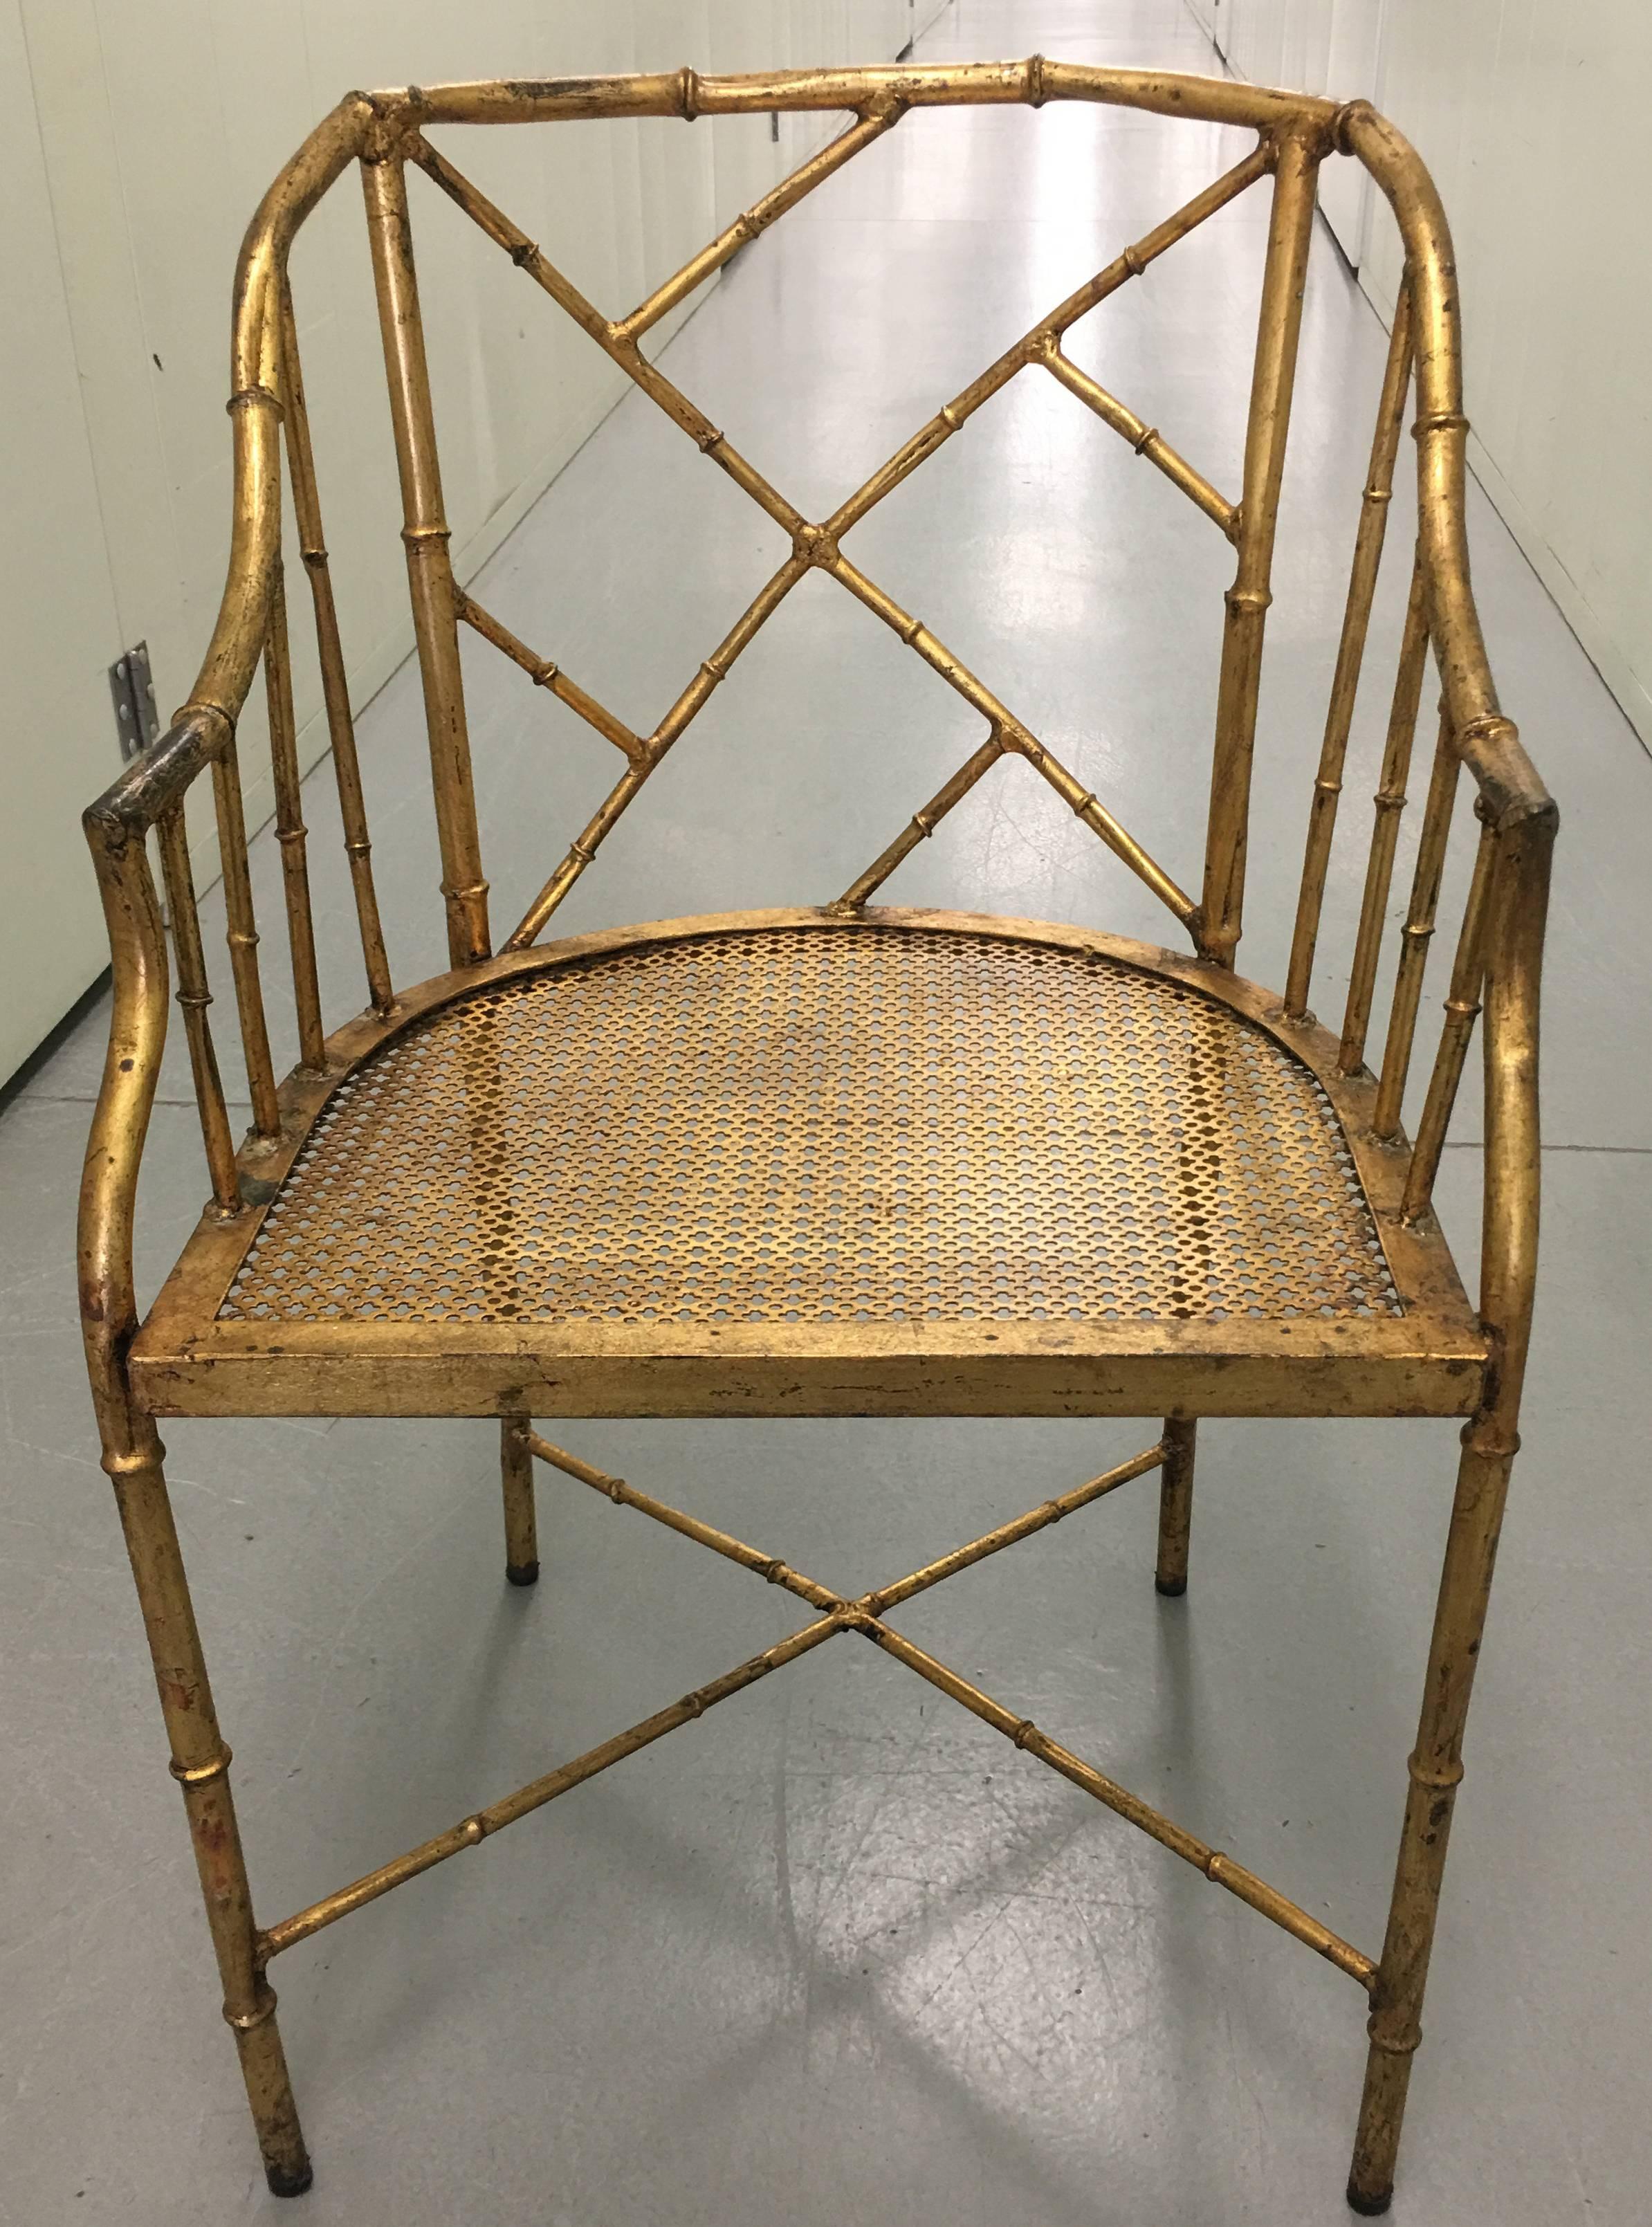 Burnished gilt metal bamboo armchair. Measure: Seat is 17.5